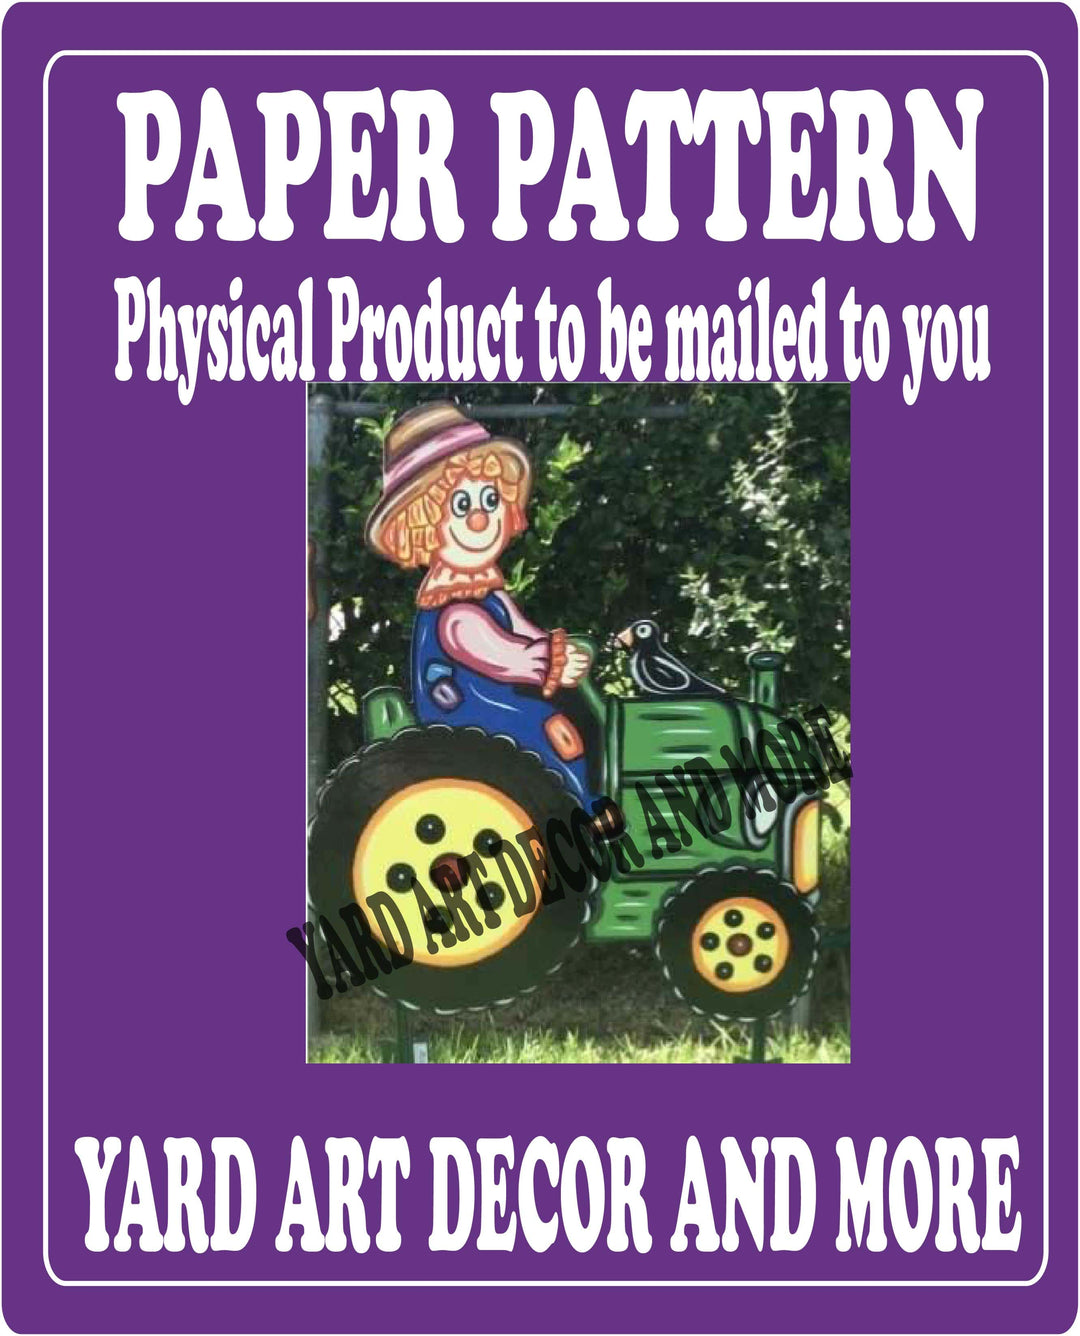 Fall Scarecrow drives Tractor yard art Paper Pattern